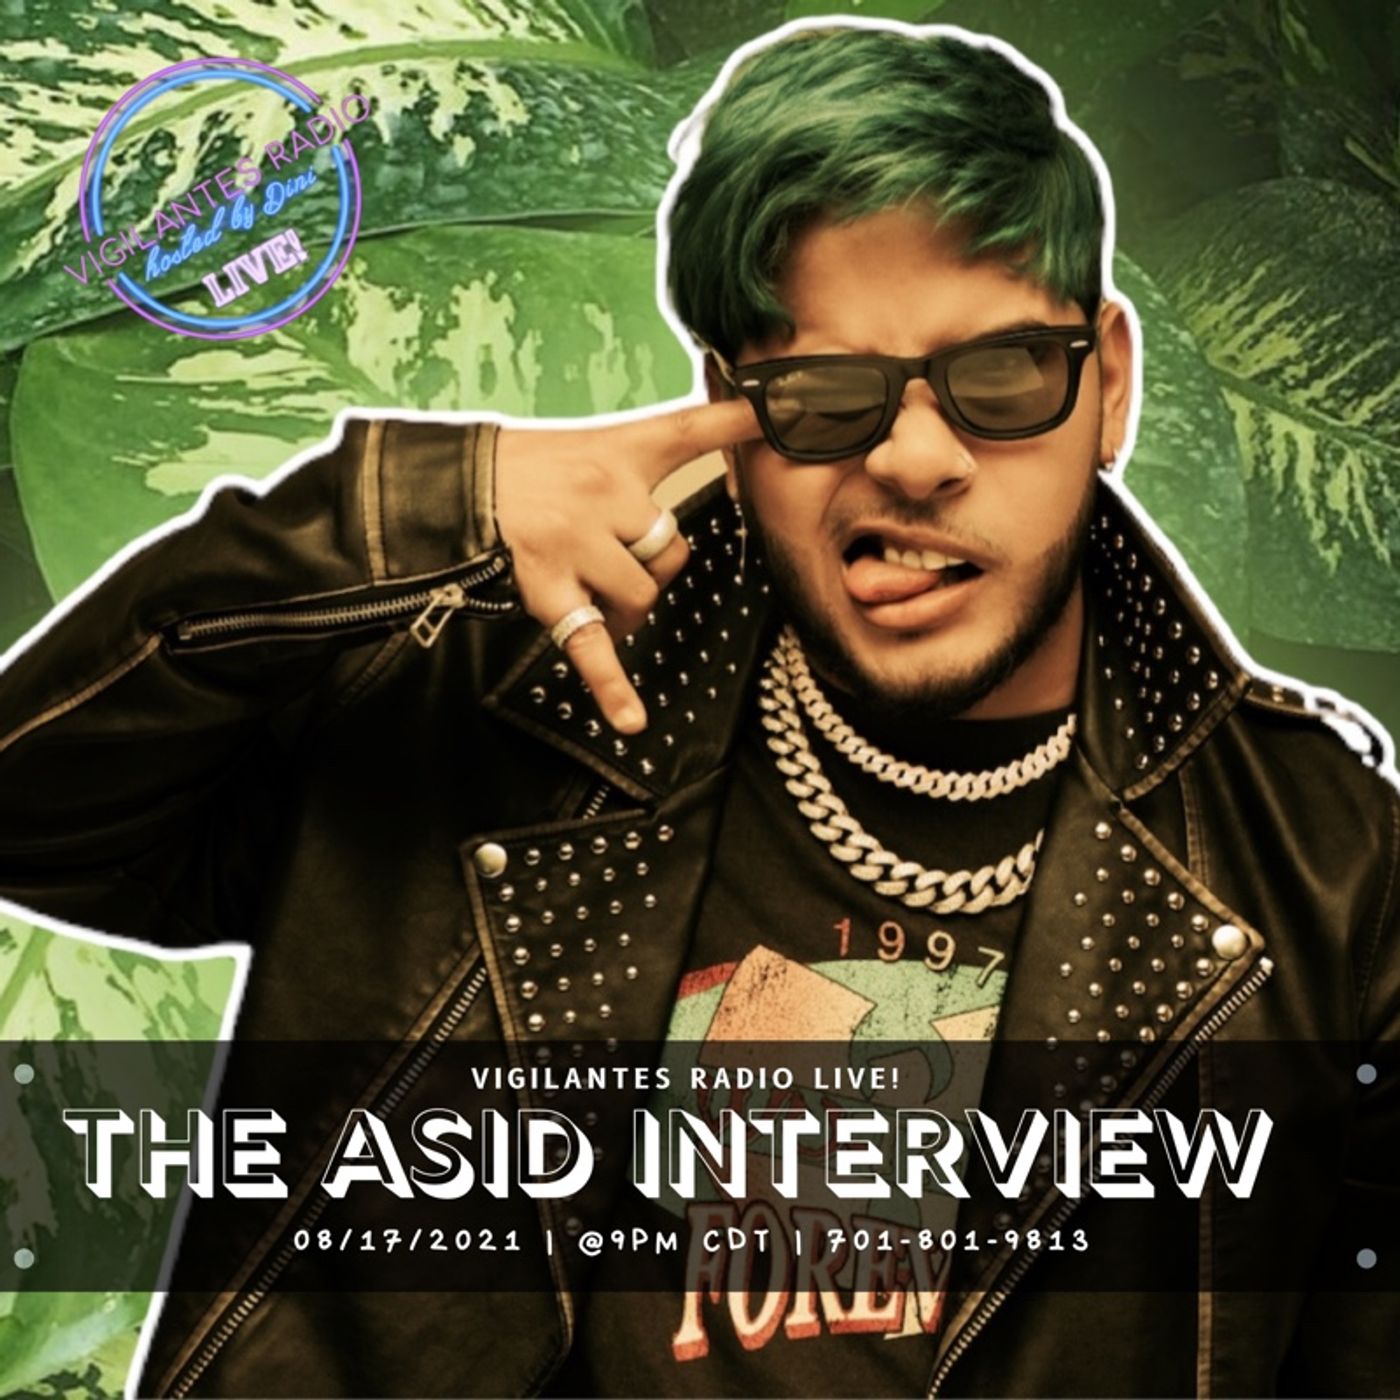 The Asid Interview. Image